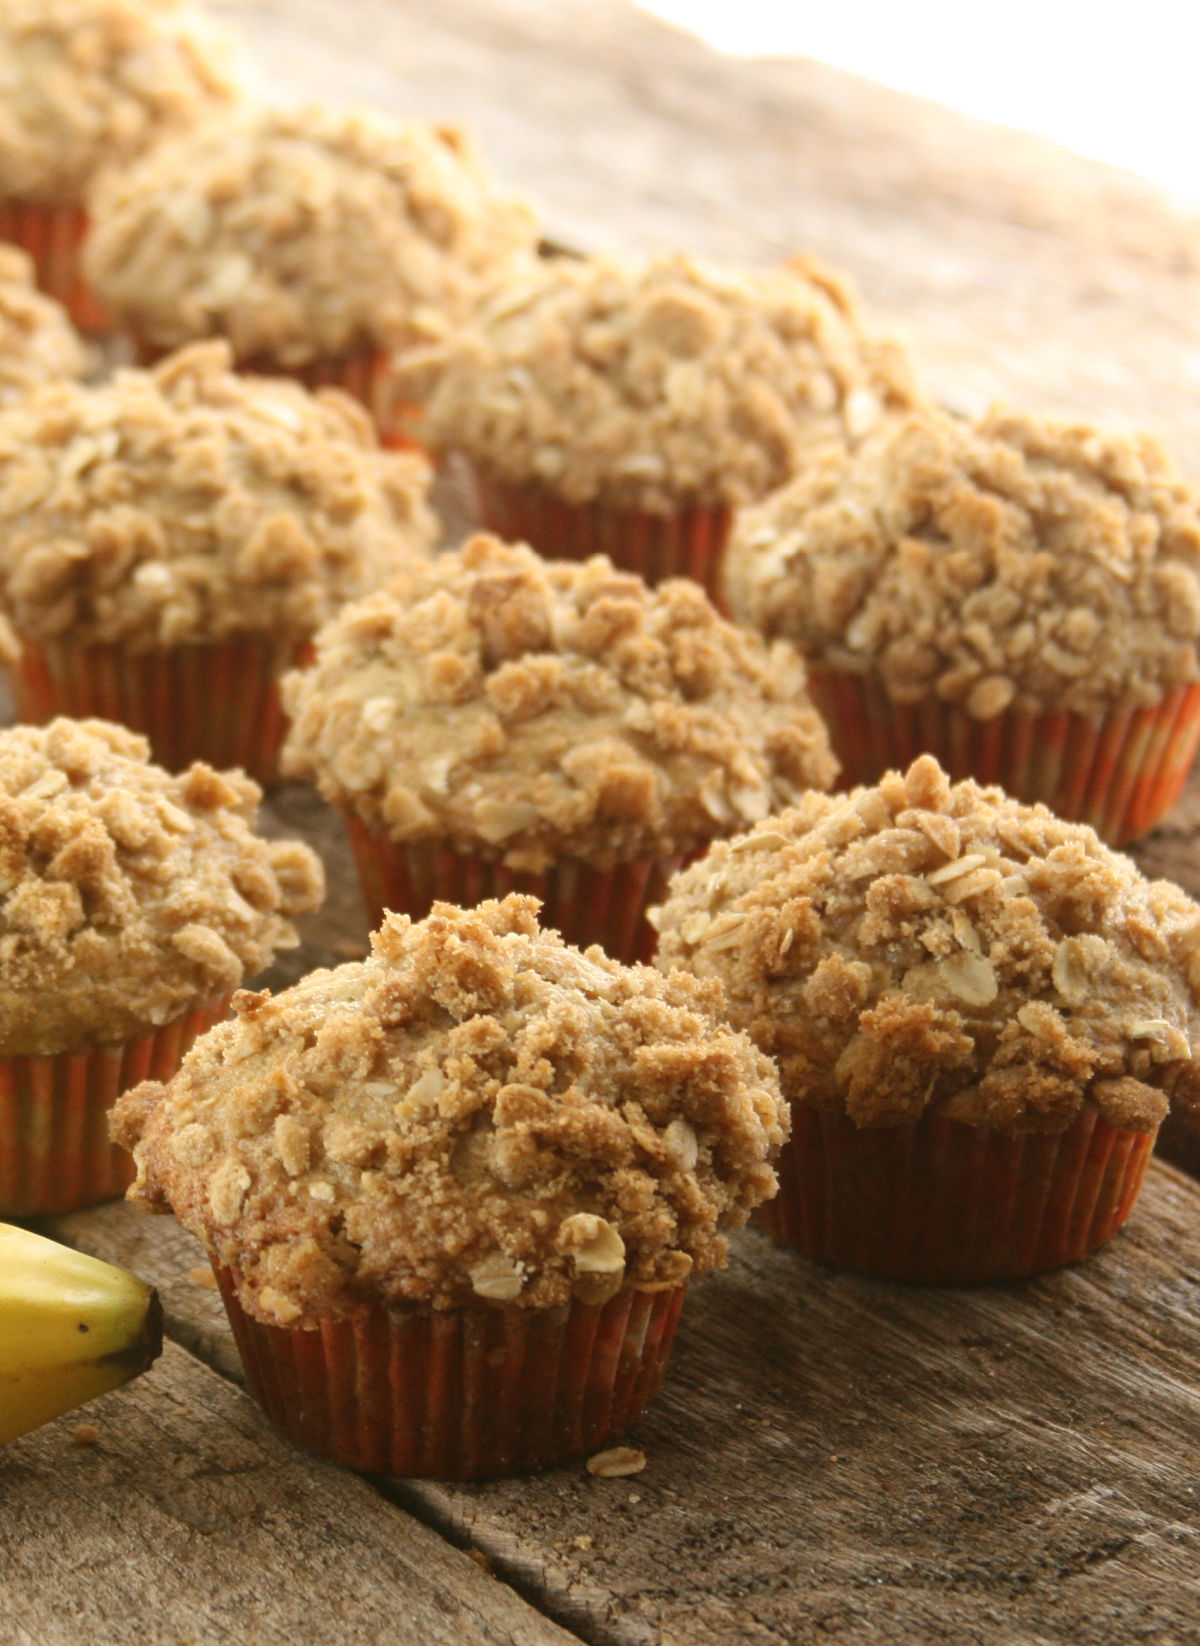 Banana muffins with oatmeal crumb topping on reclaimed wood boards.